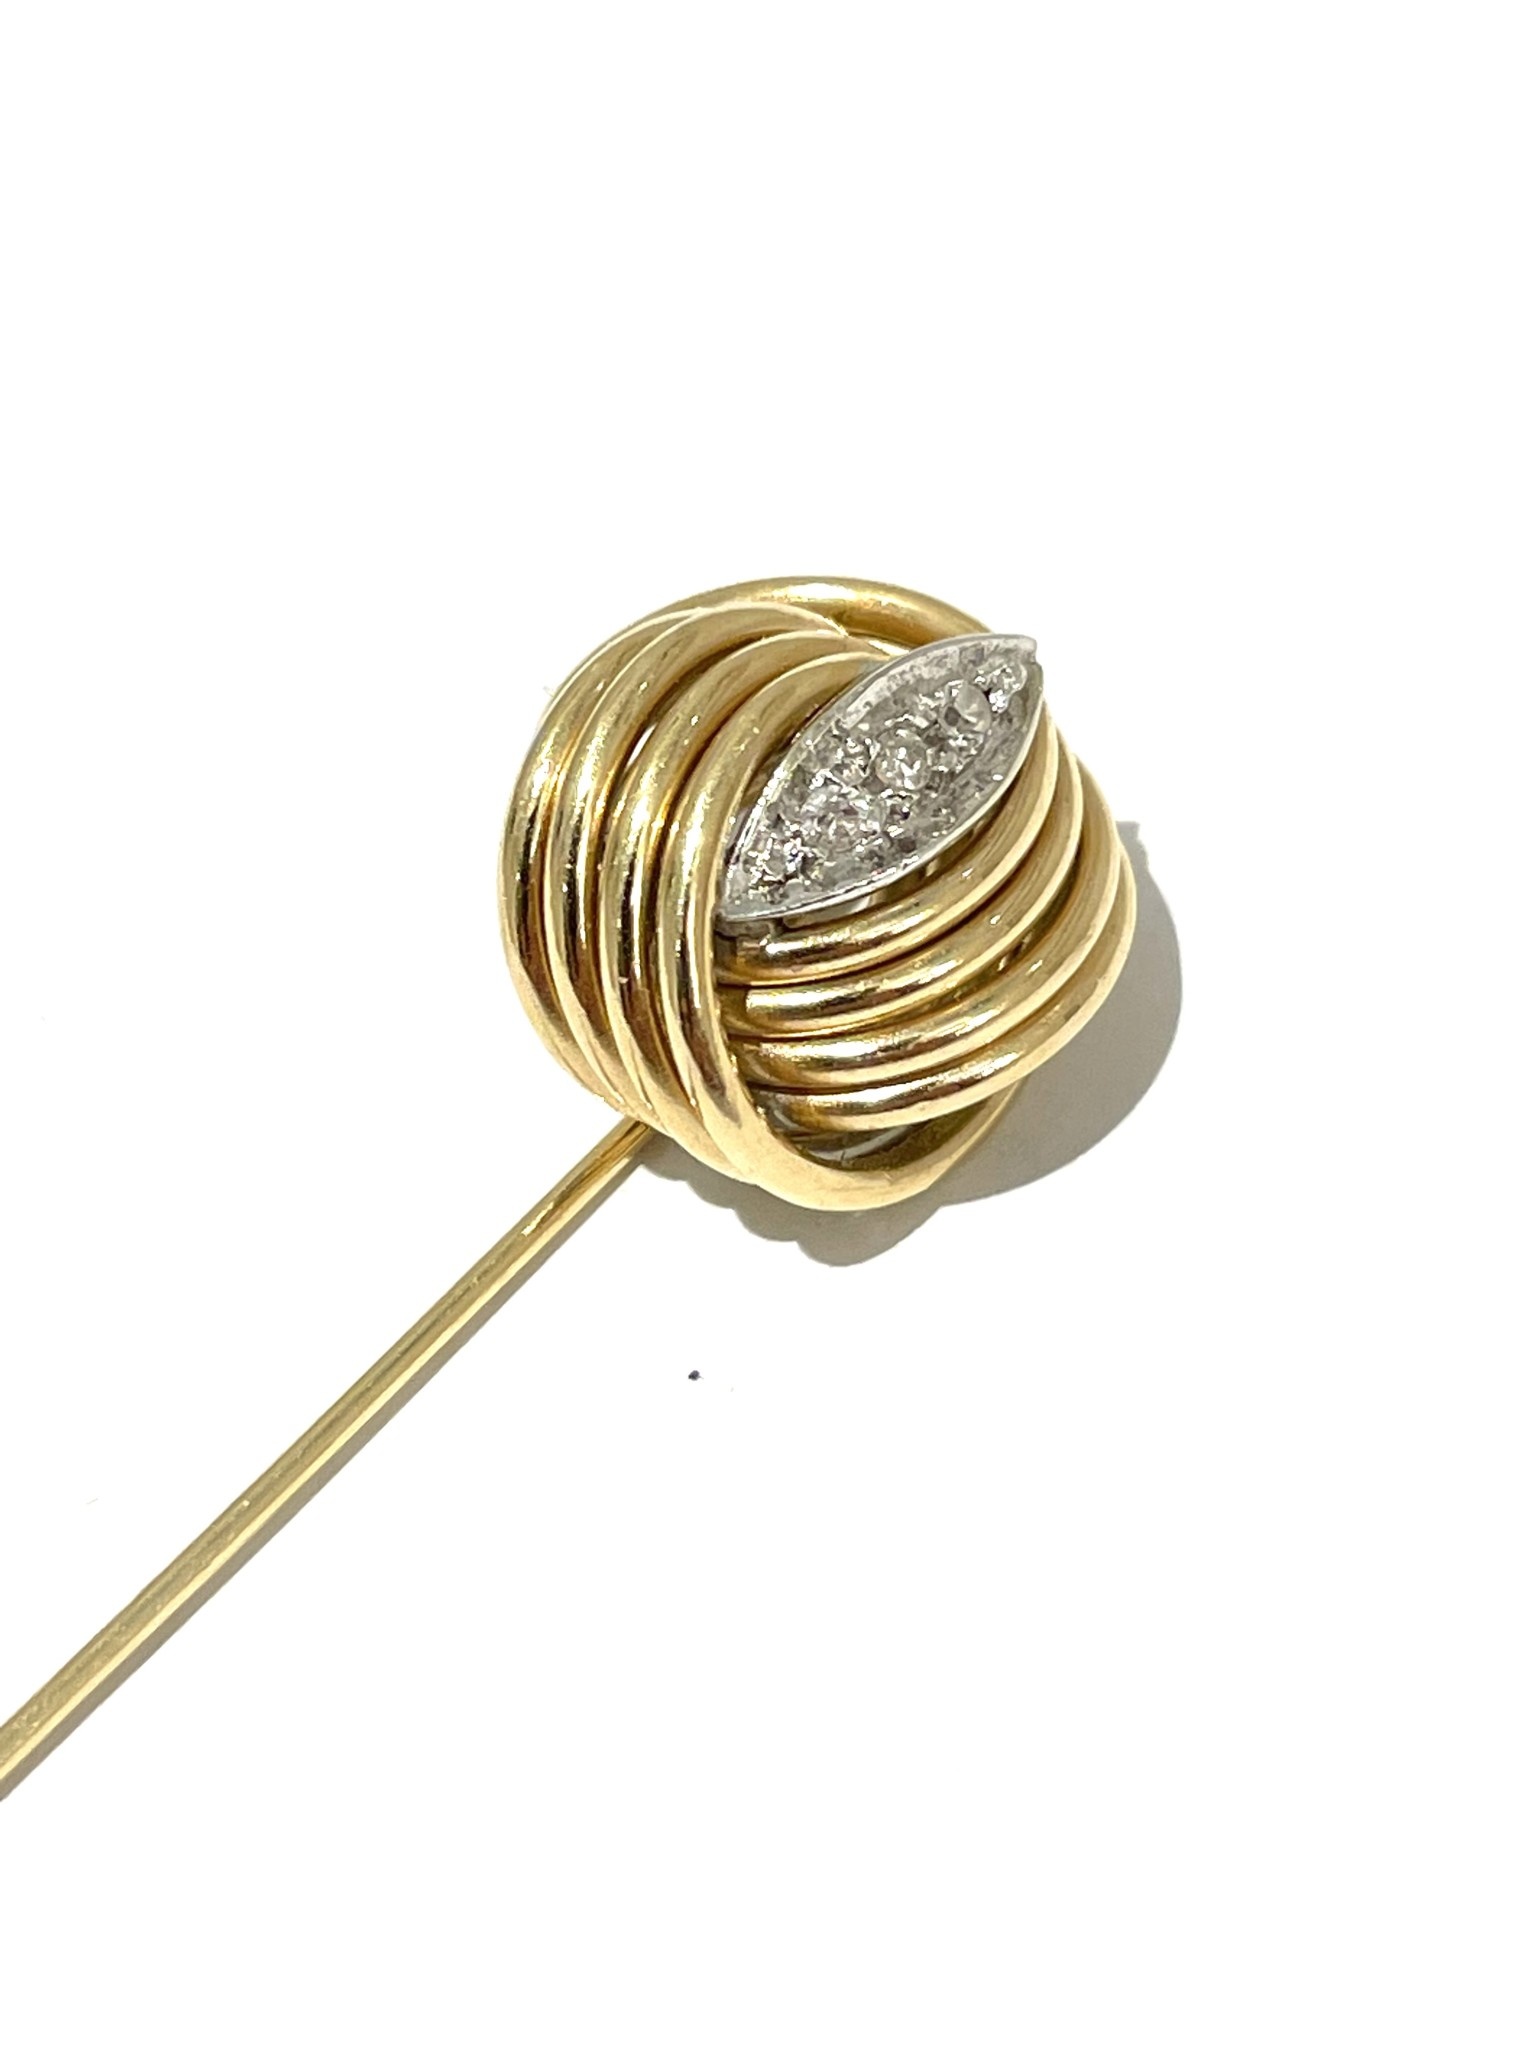 Antique Rolled Gold Stick Pins (2)